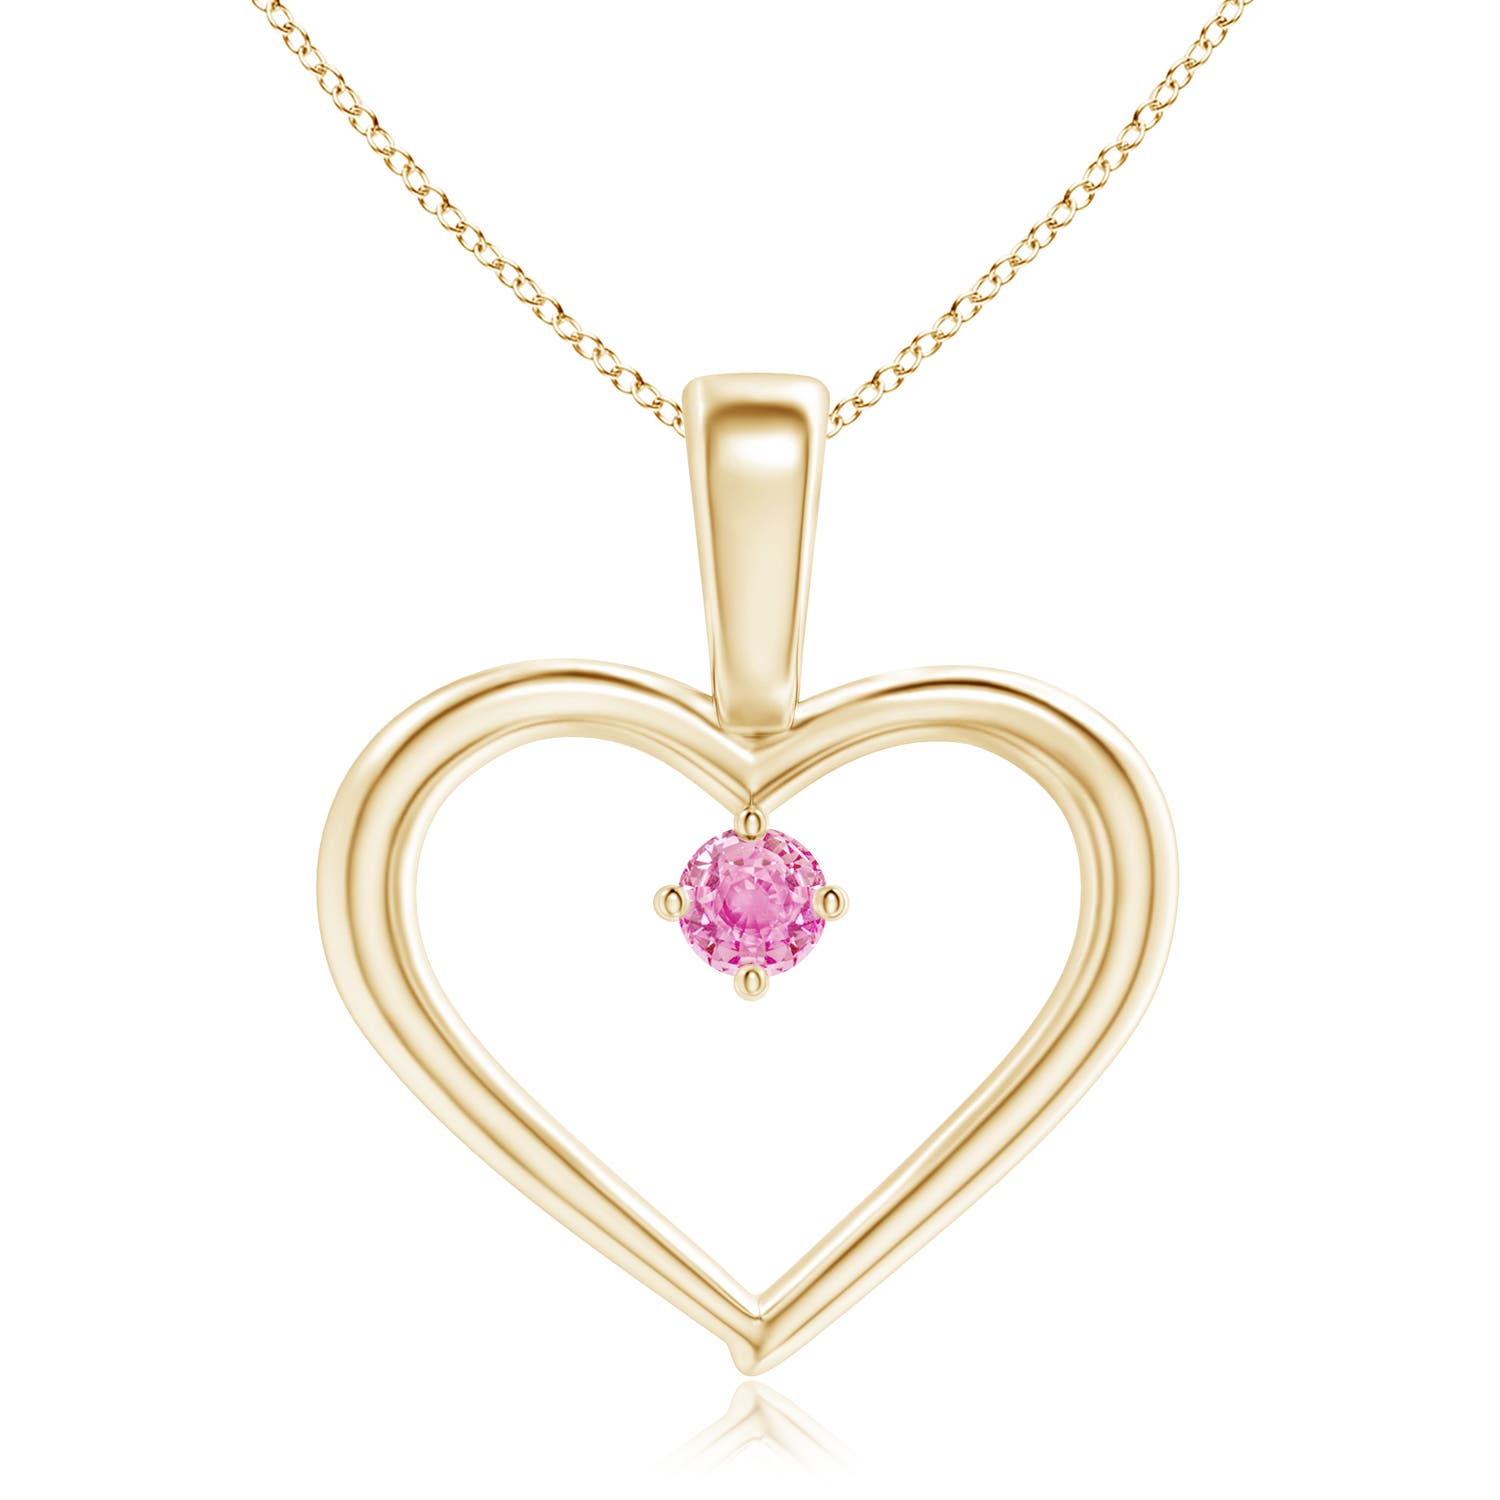 A - Pink Sapphire / 0.09 CT / 14 KT Yellow Gold